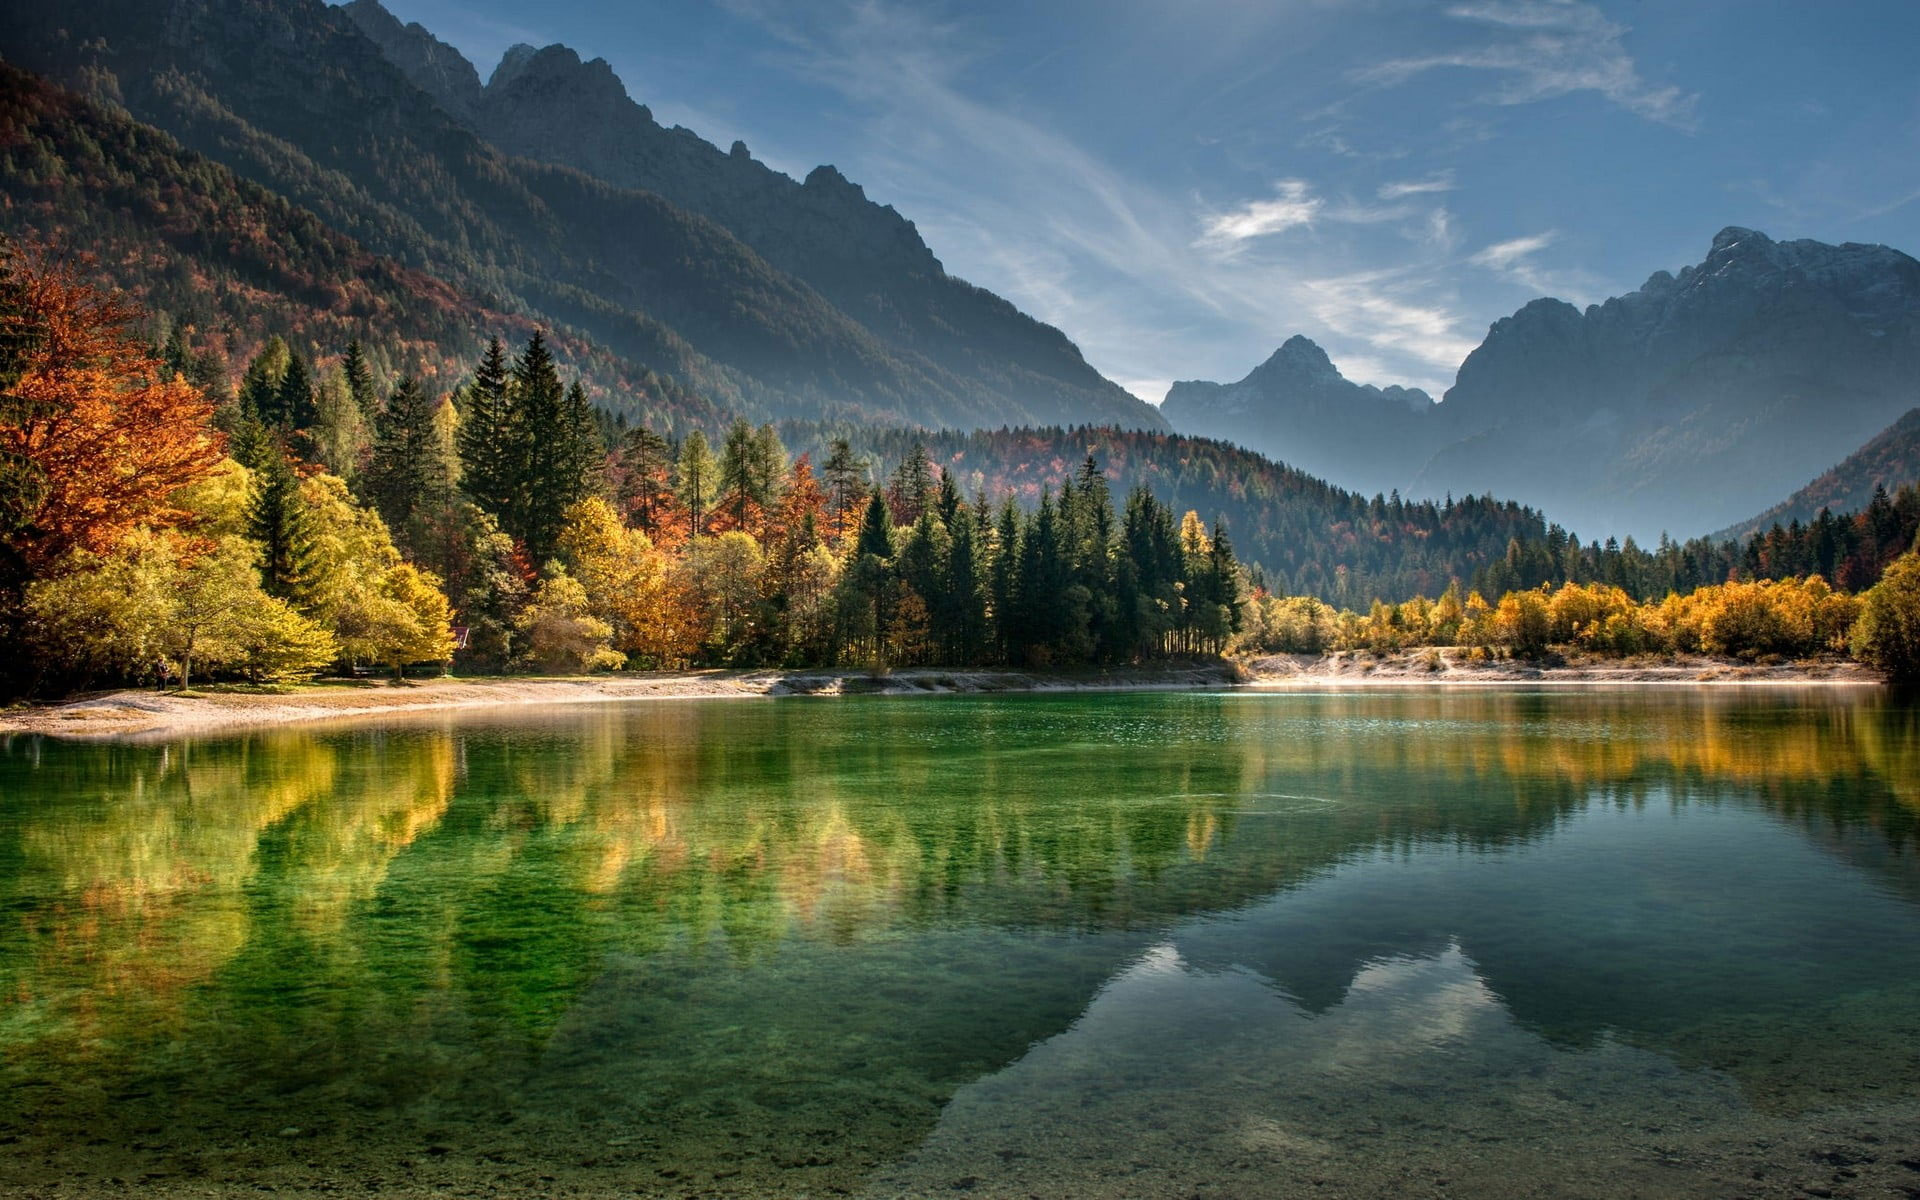 Body of water, calm body of water surrounded with trees and mountains, body of water, Nature